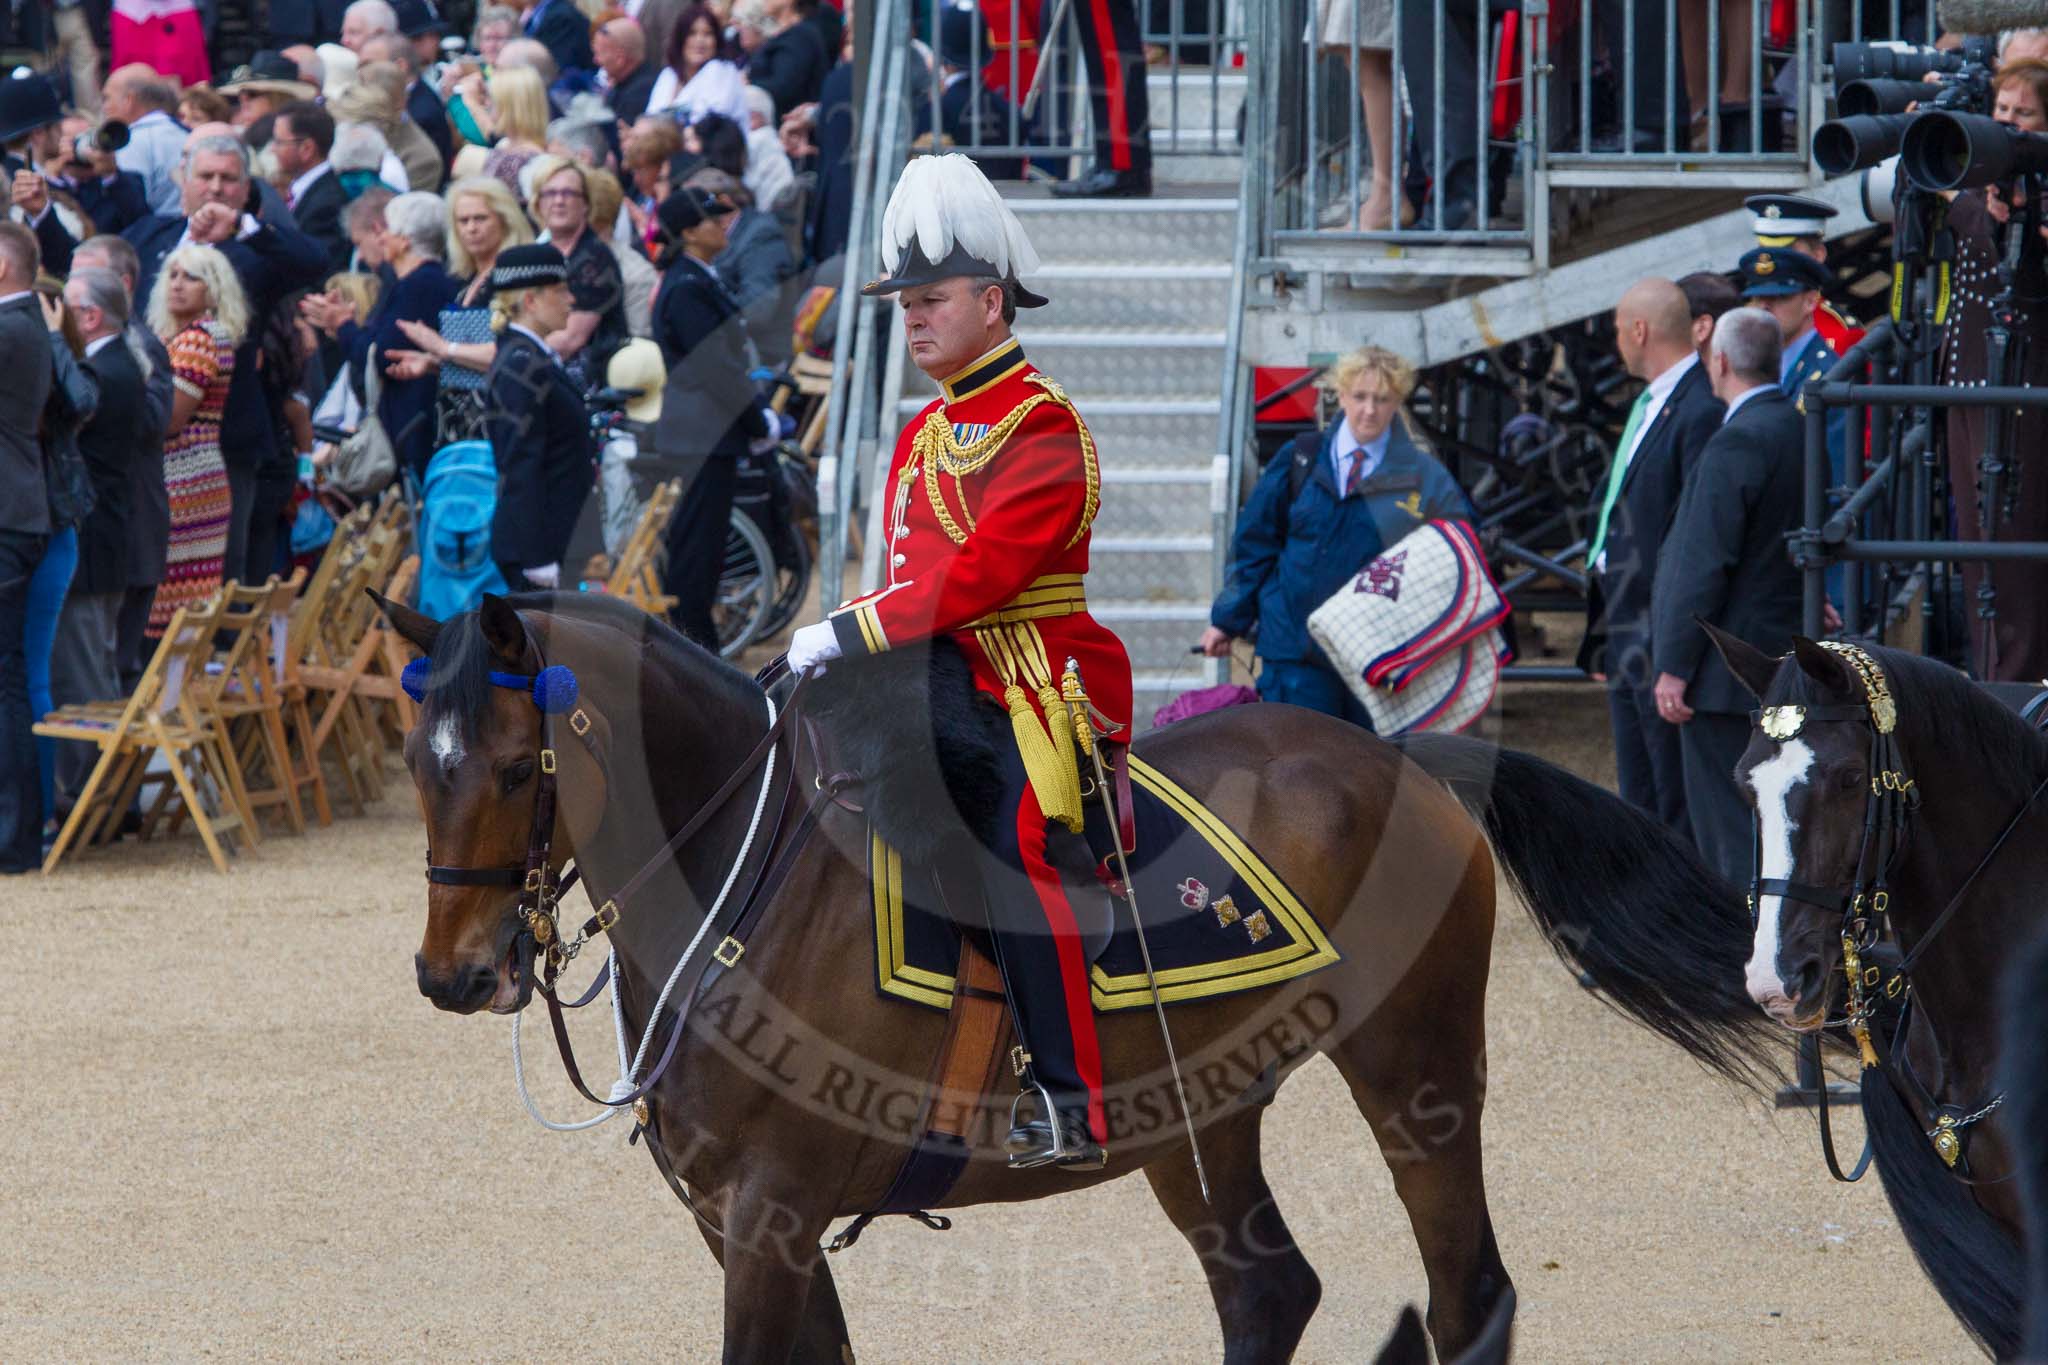 Trooping the Colour 2014.
Horse Guards Parade, Westminster,
London SW1A,

United Kingdom,
on 14 June 2014 at 12:14, image #909